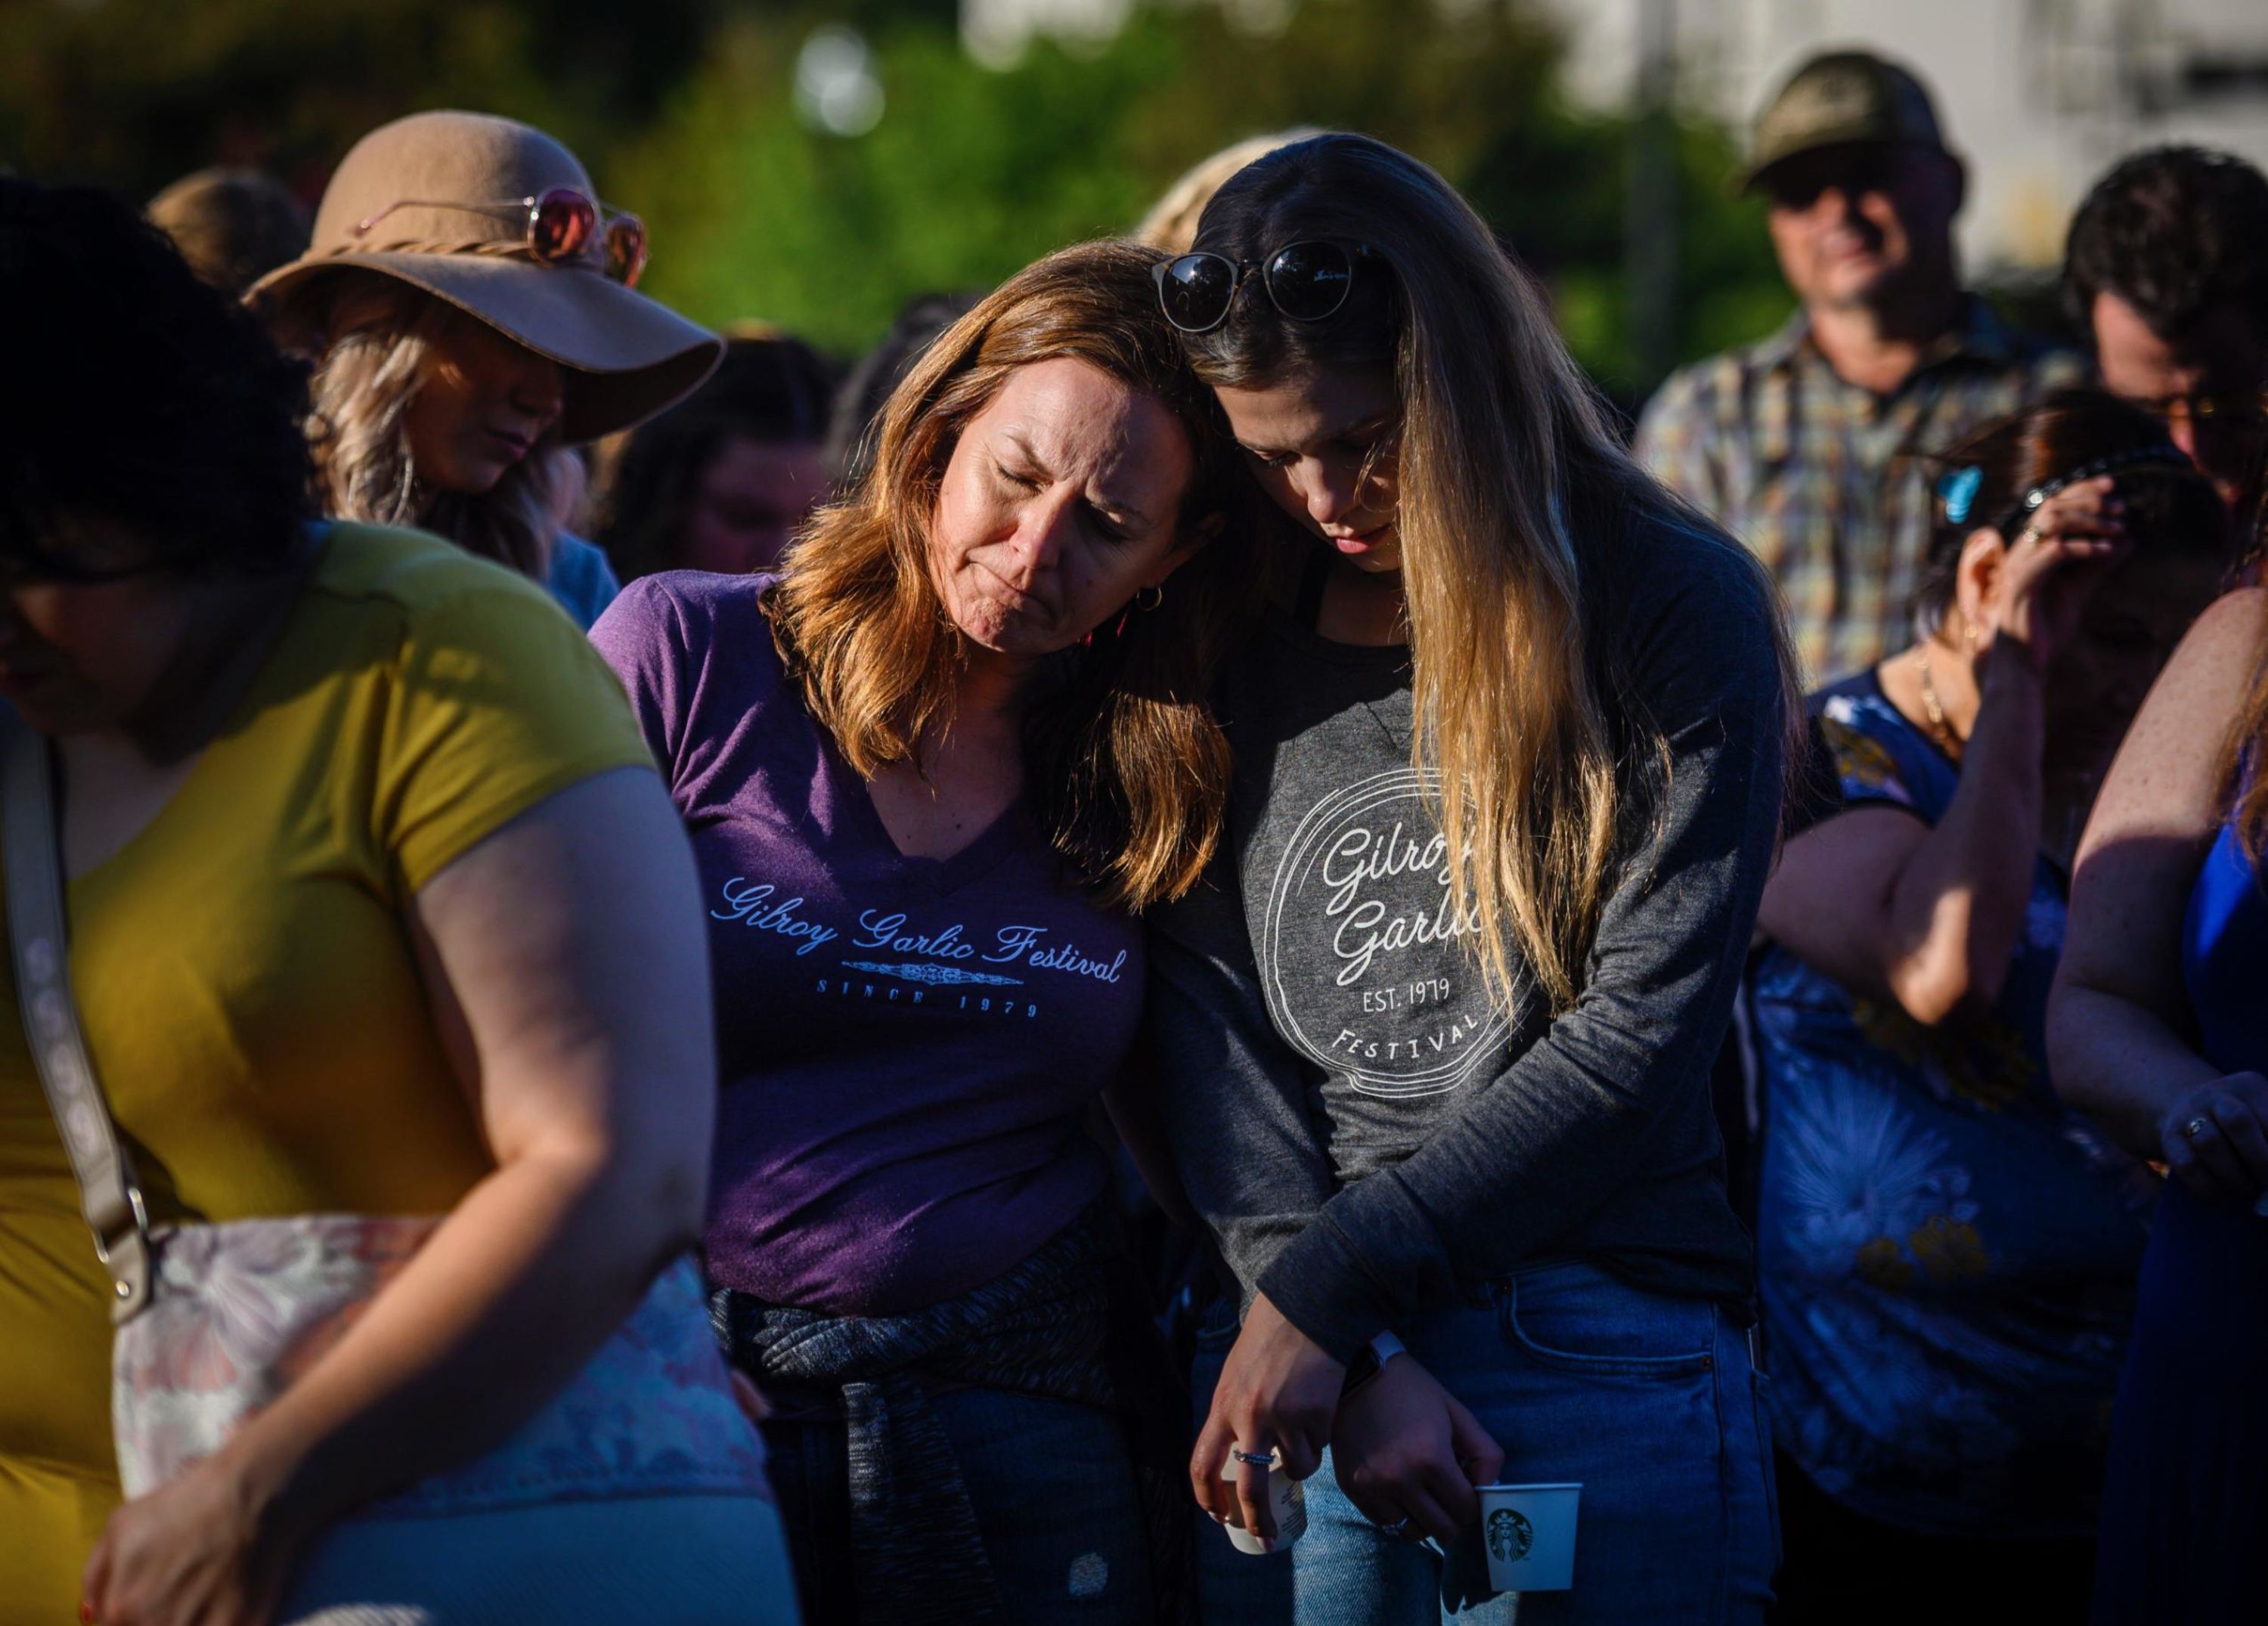 Kirstin Bright, left, leans on Jessica Bright during a vigil at the Gilroy Police Department in California on Monday, July 29. Kirstin was at the Gilroy Garlic Festival during the deadly shooting on Sunday.